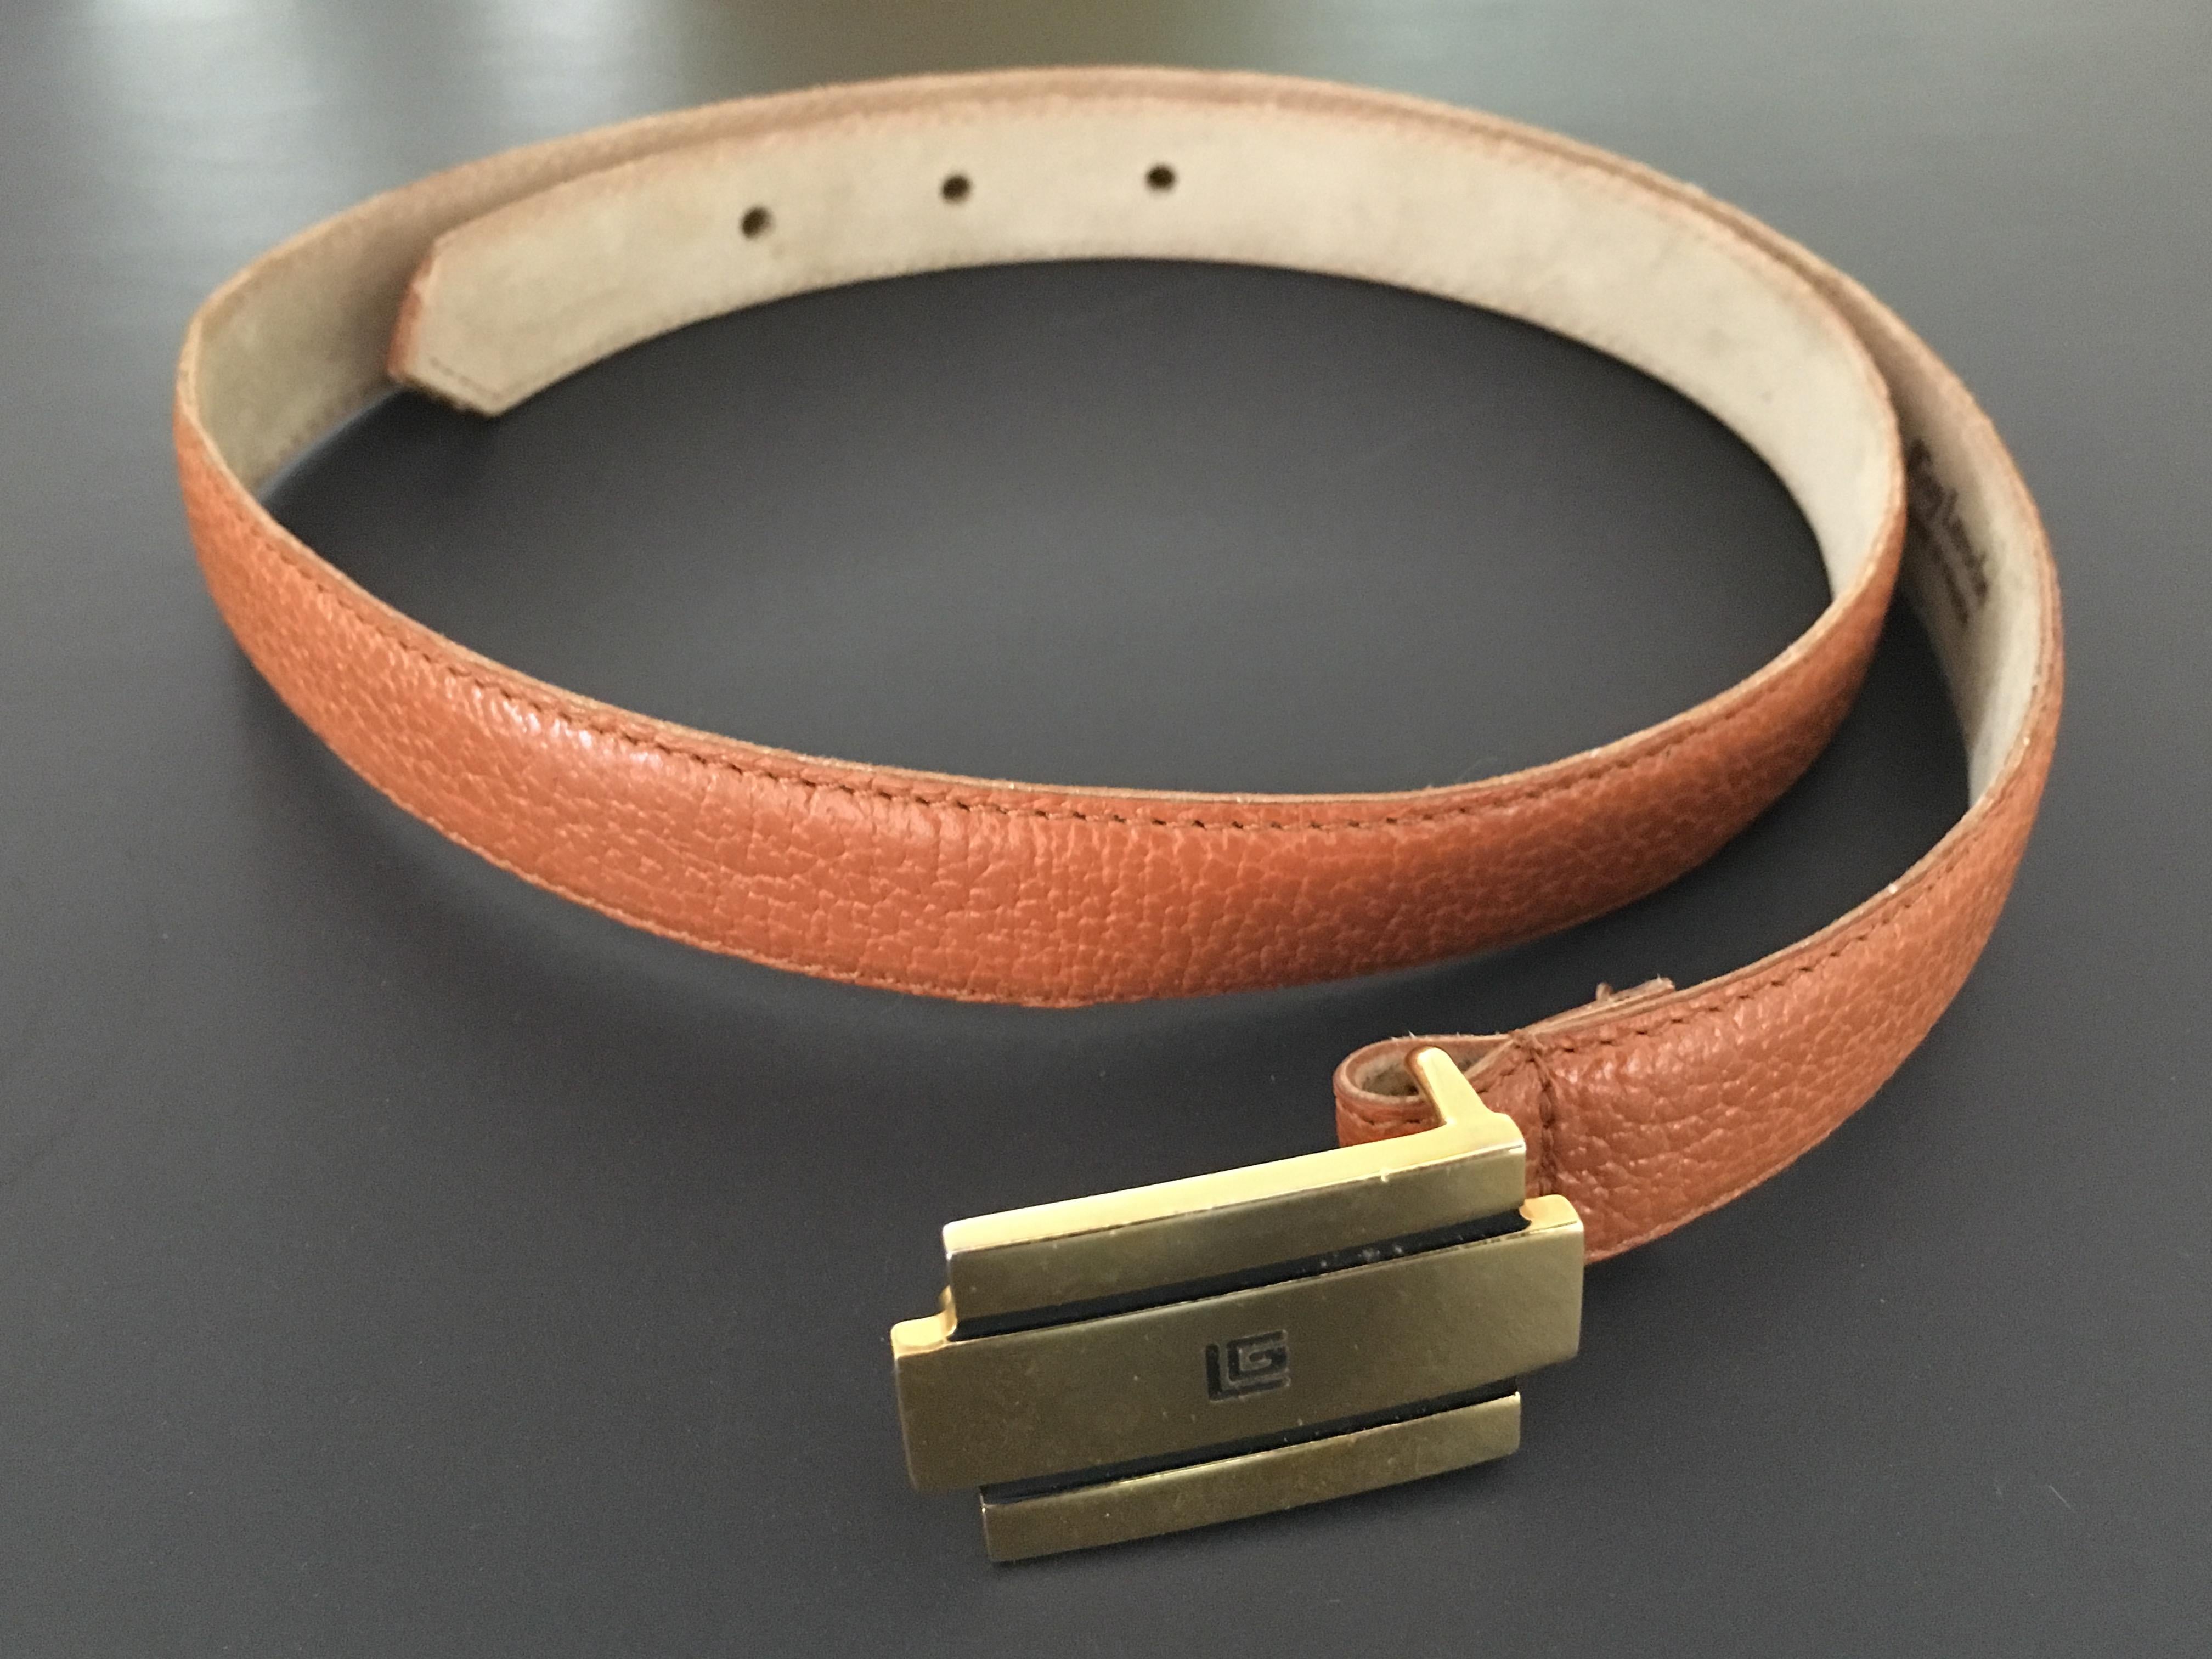 Guy Laroche 1990s tan leather belt with brass buckle with logo is a size small 2 / 4. This belt looks amazing worn high waisted.  Back side of belt is suede. There are a few very tiny black dots on the belt strap near buckle as shown in photo but